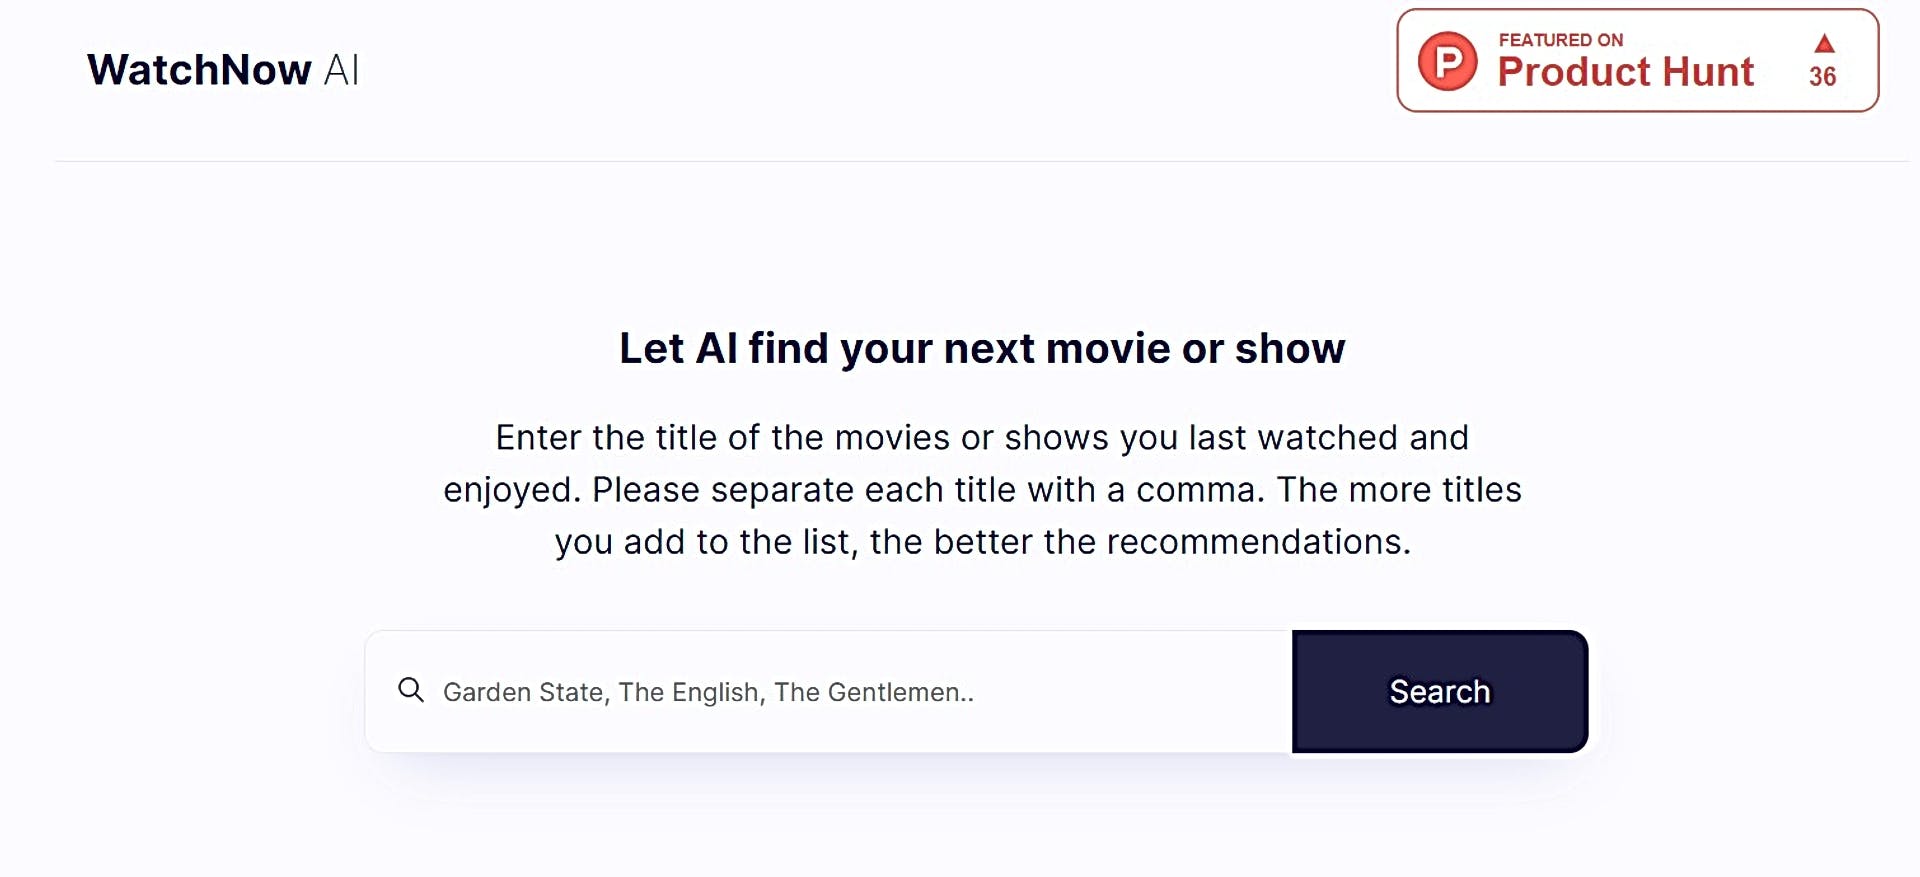 WatchNow AI featured